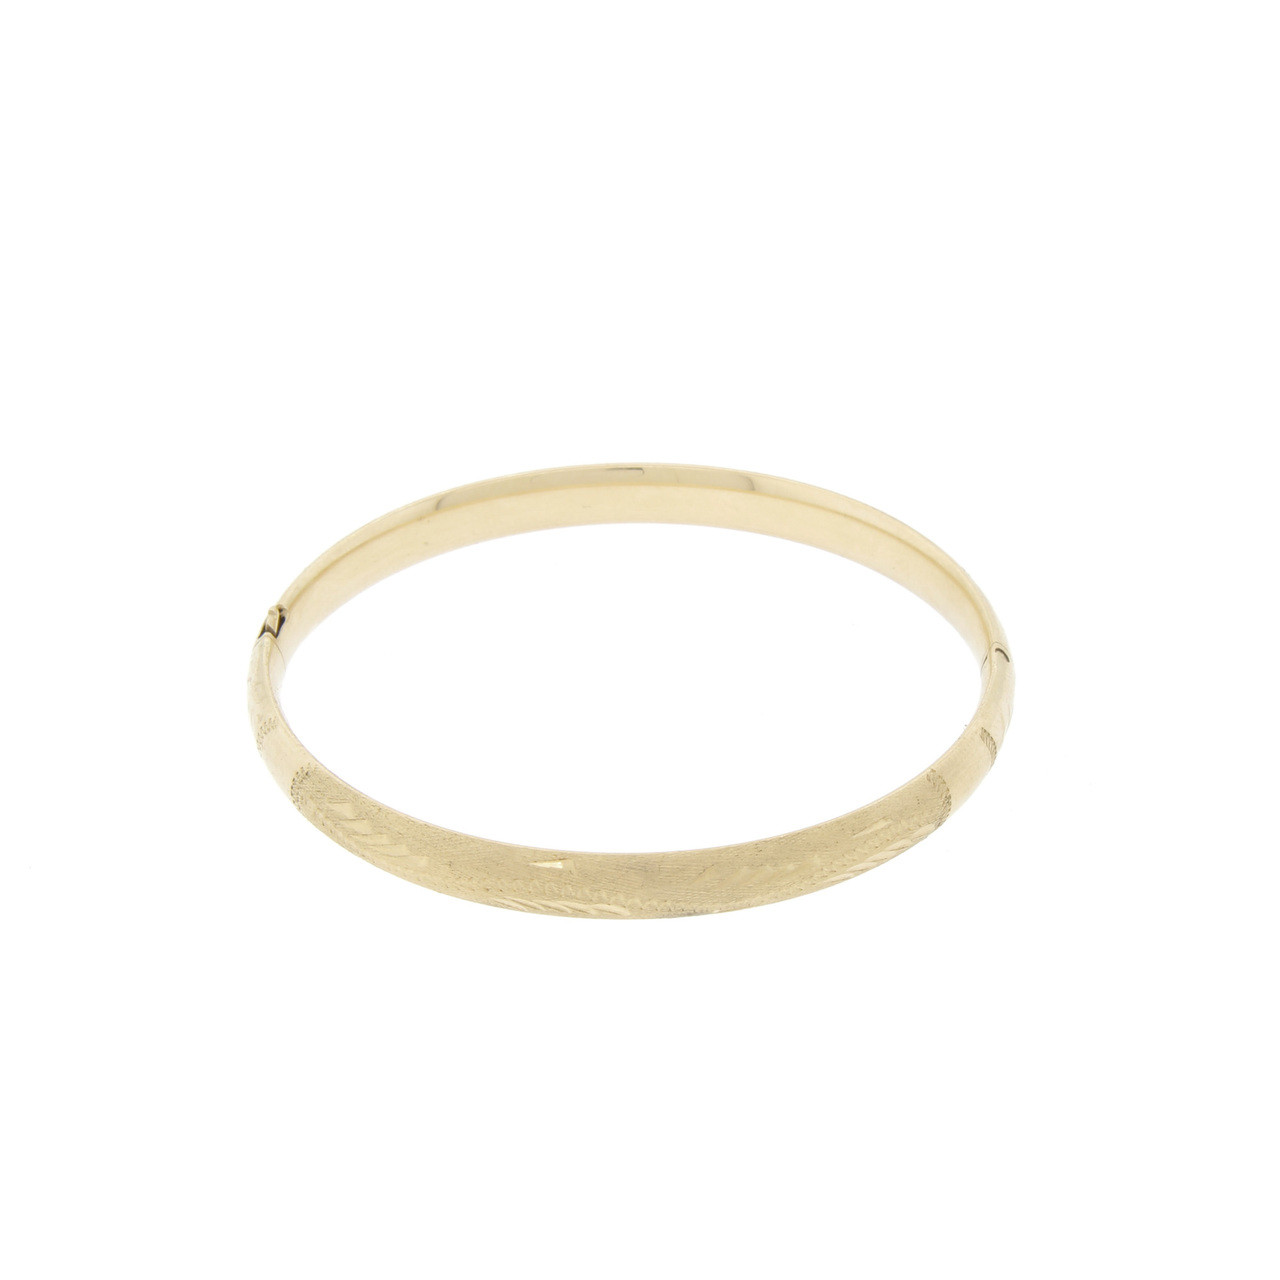 14K Yellow Gold Slip On ID Baby Bangle Bracelet Cuff Expandable Stackable  5.5: 31940875780165